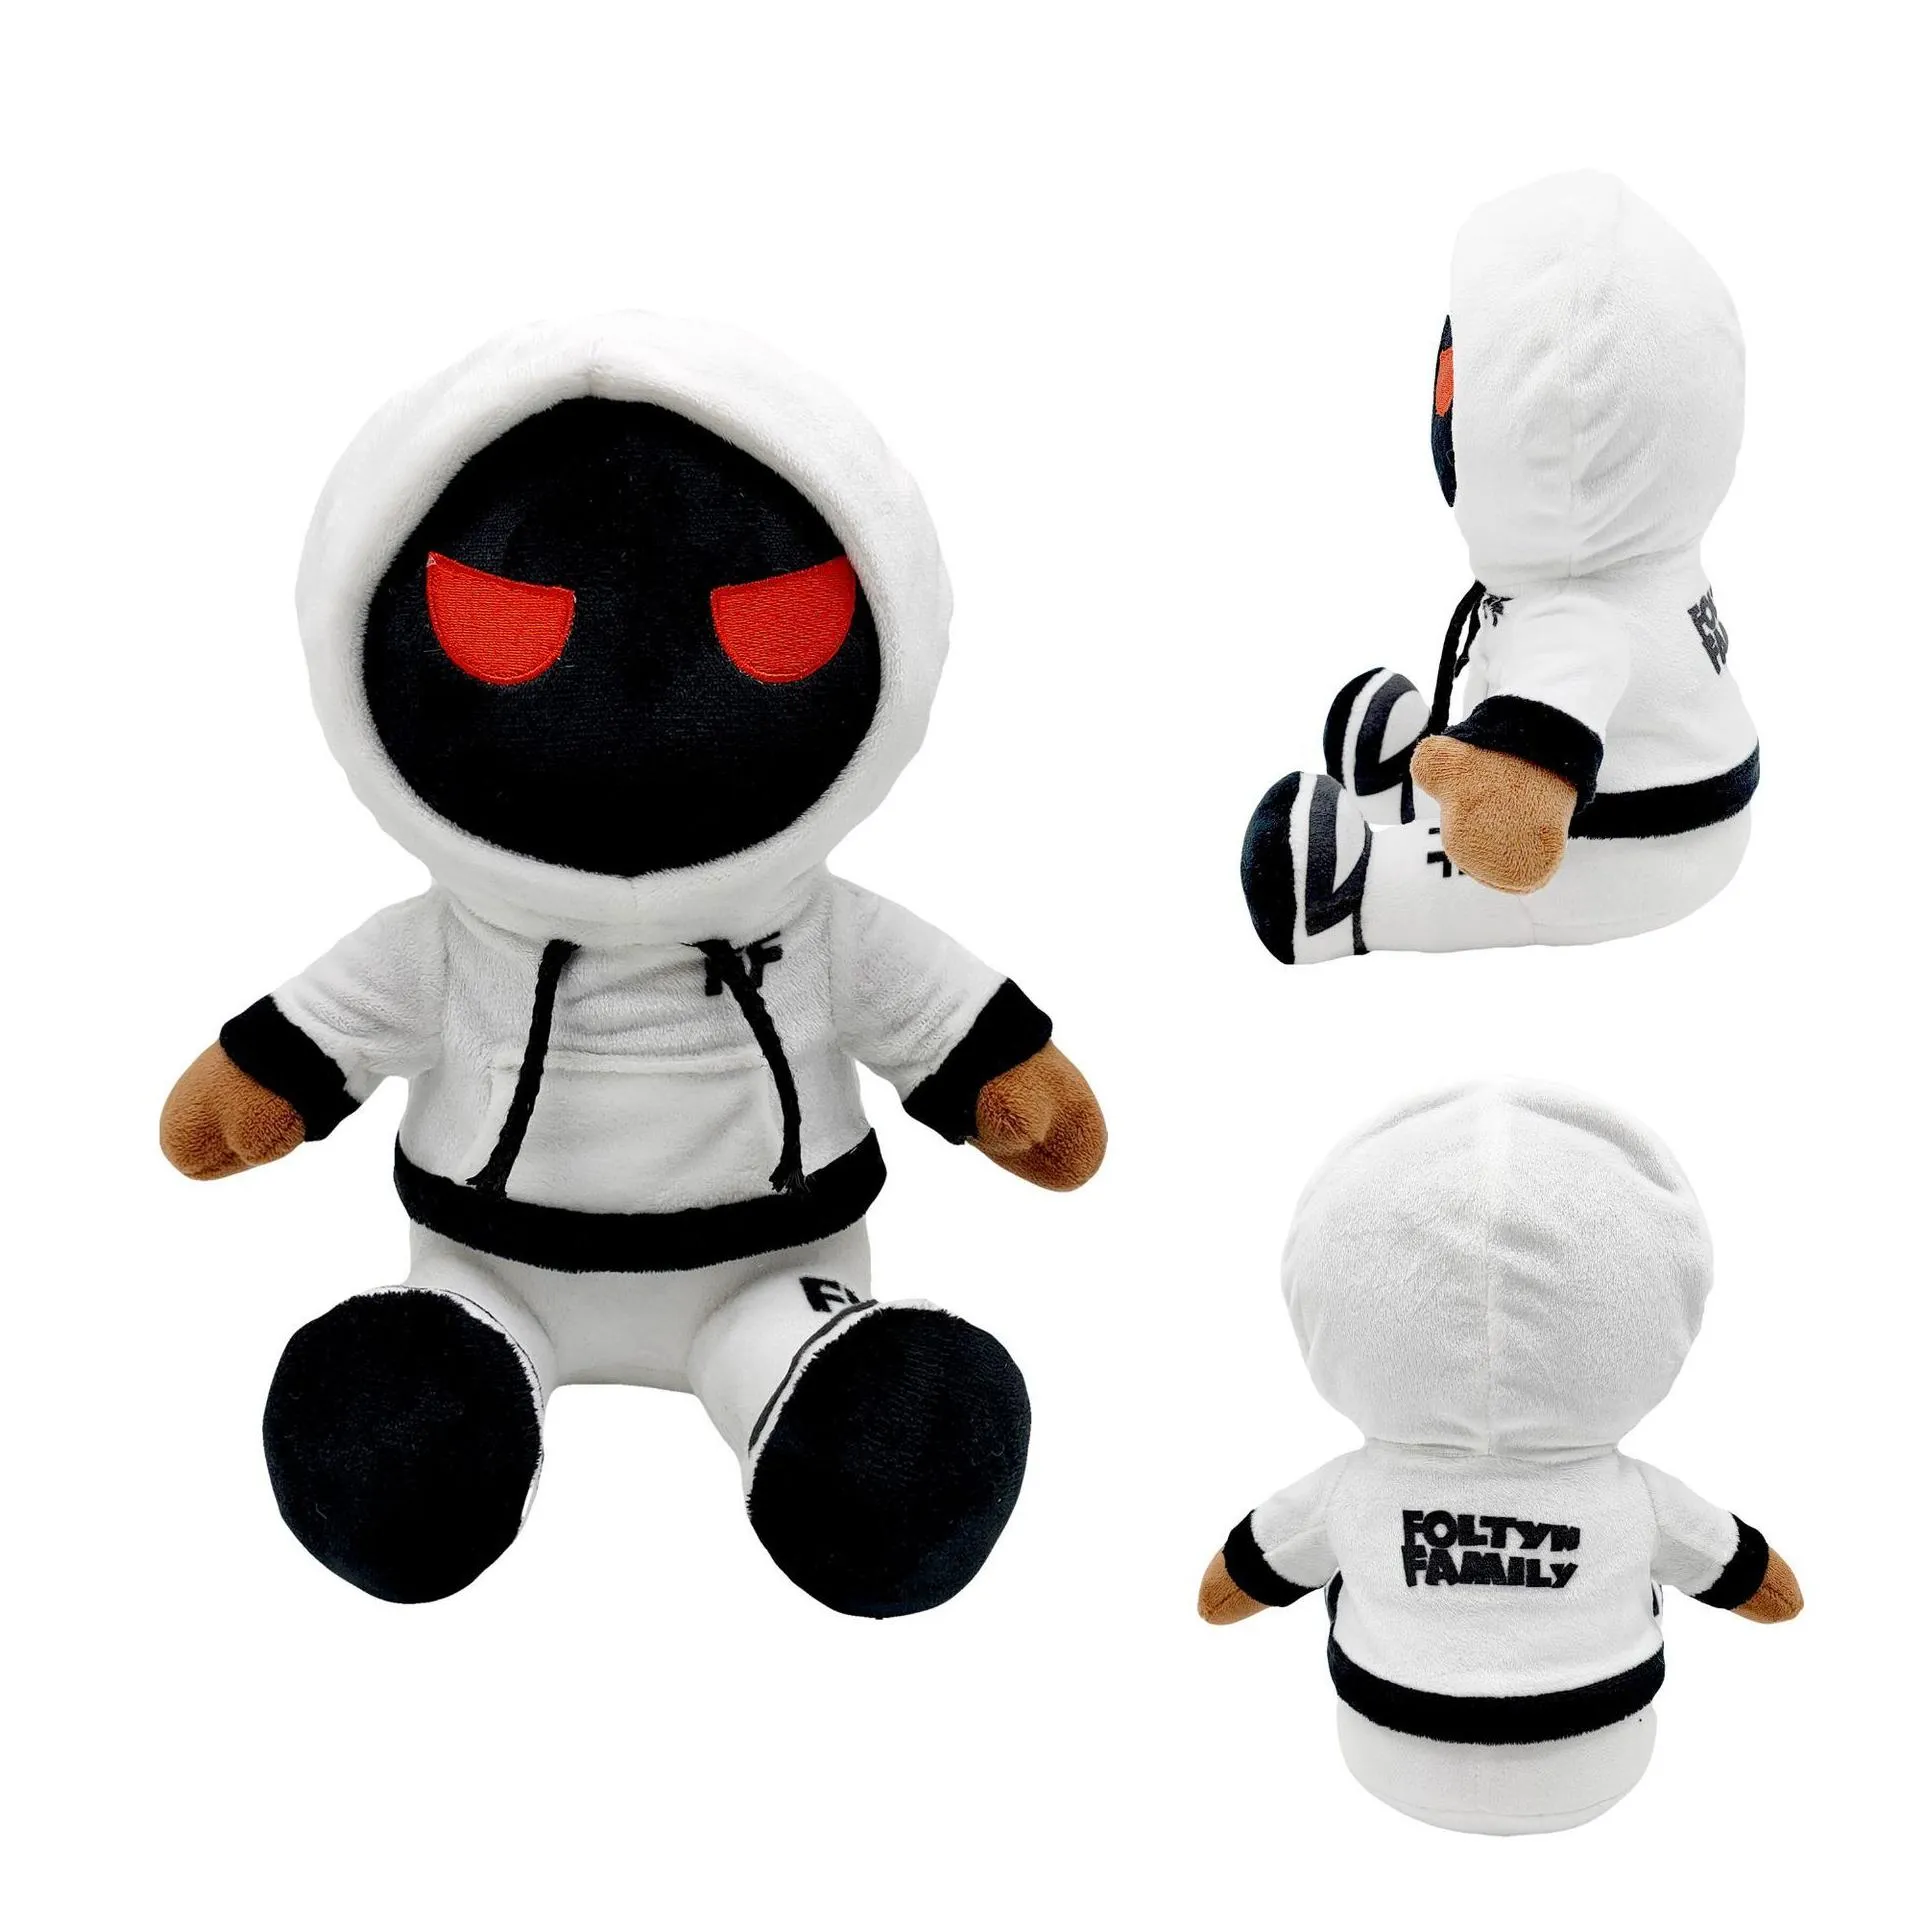 YORTOOB Foltyn Family Plush Toy Black-faced Mystery Man in a Hoodie Gift or Home Decorations